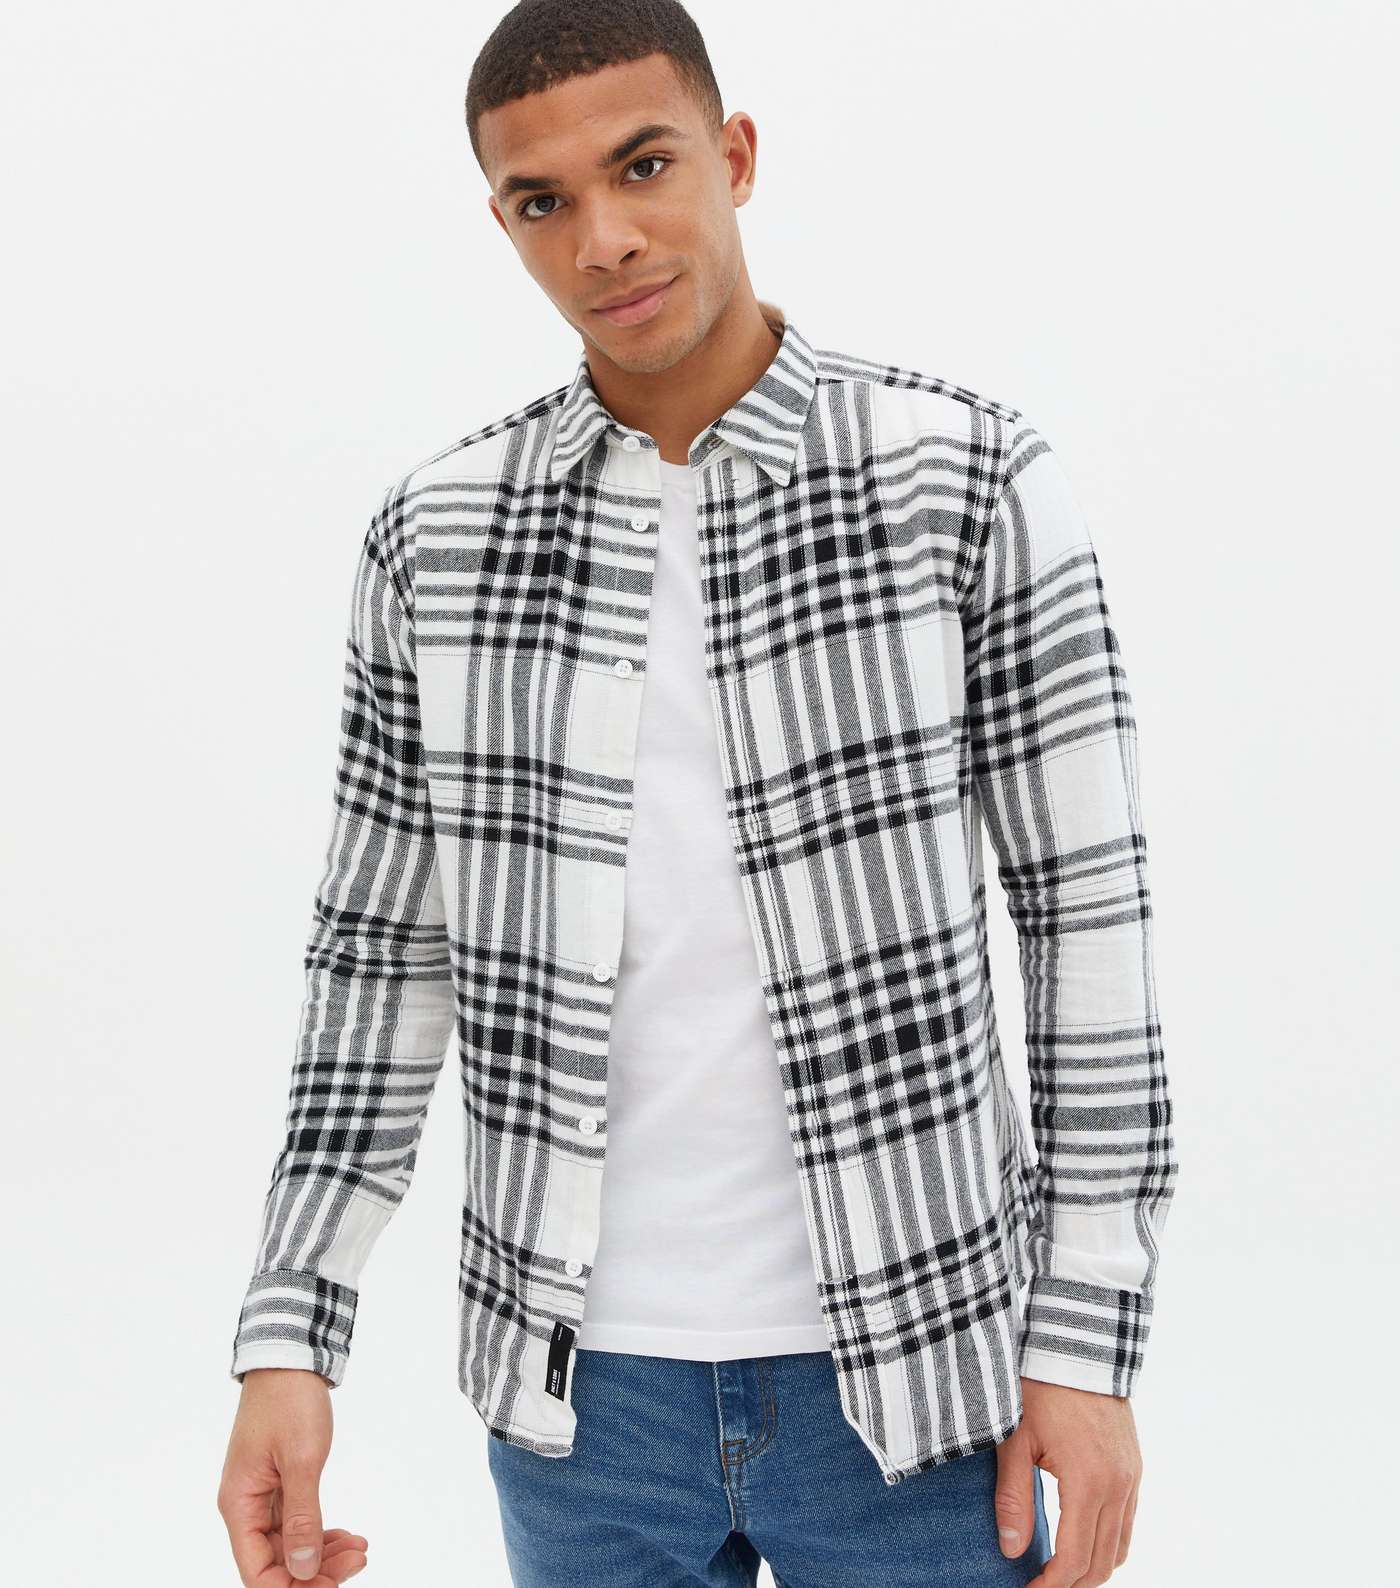 Only & Sons White Check Long Sleeve Shirt